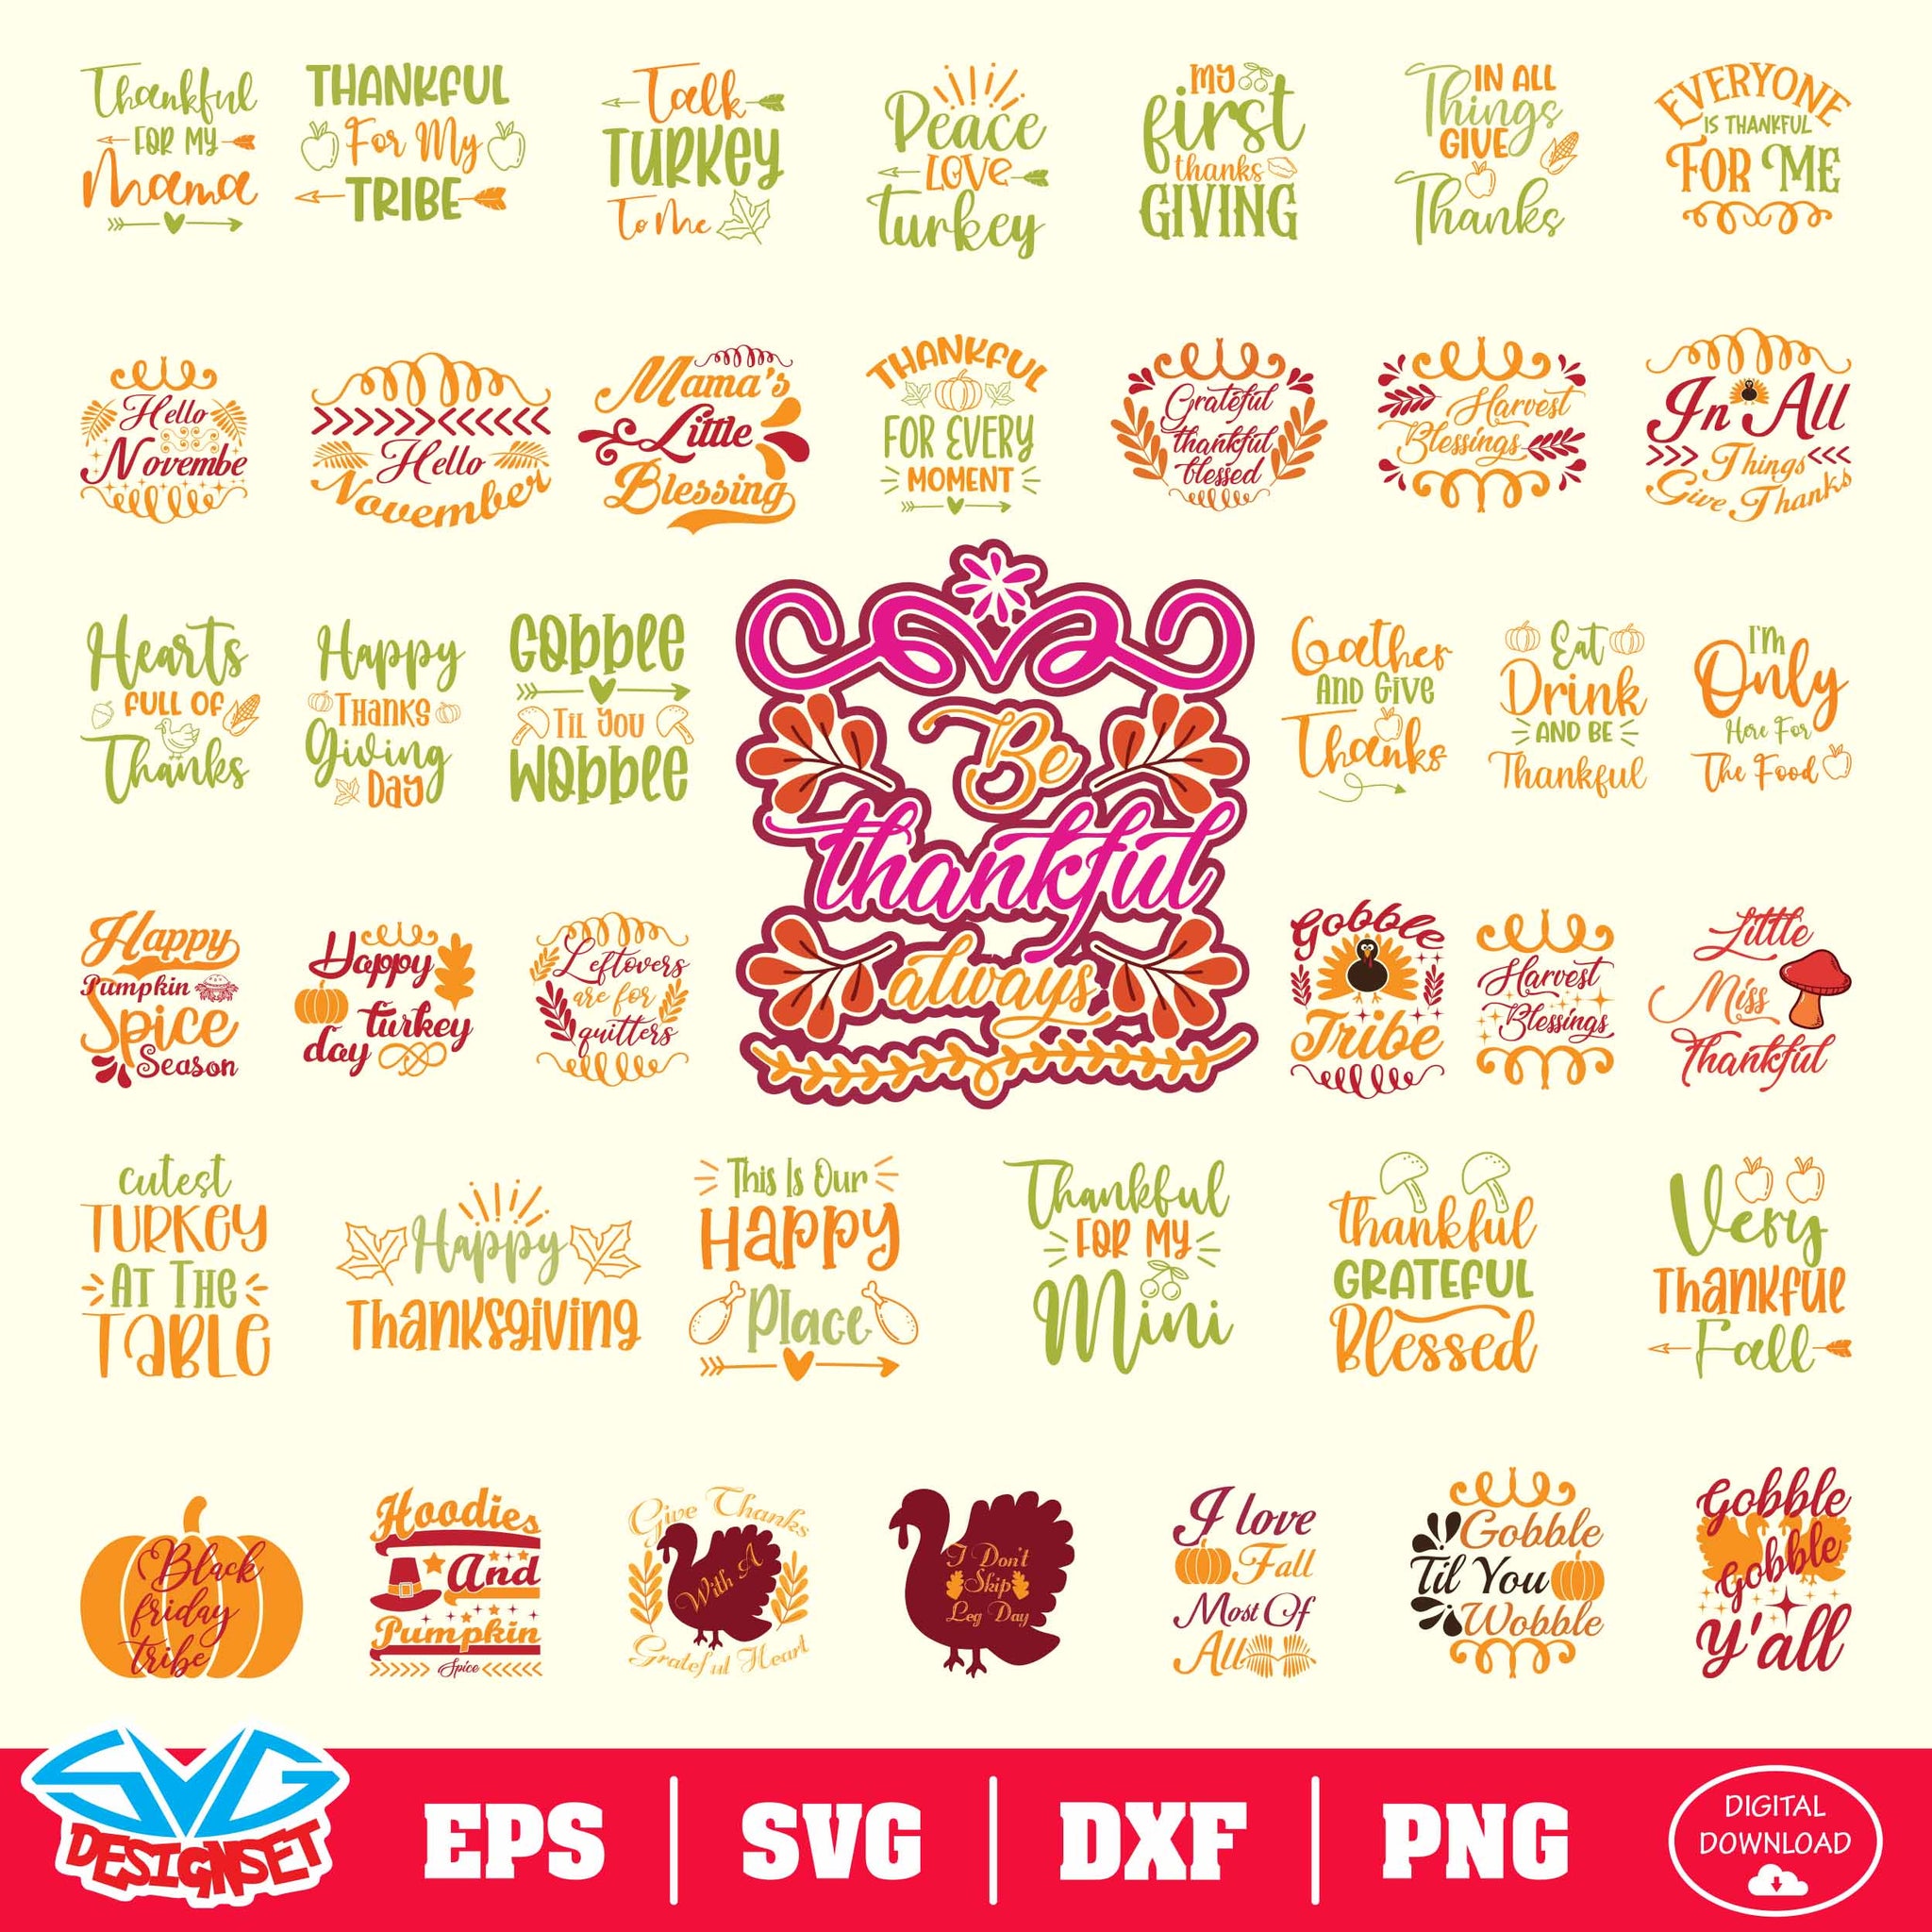 Thanksgiving Svg, Dxf, Eps, Png, Clipart, Silhouette and Cutfiles #001 - SVGDesignSets